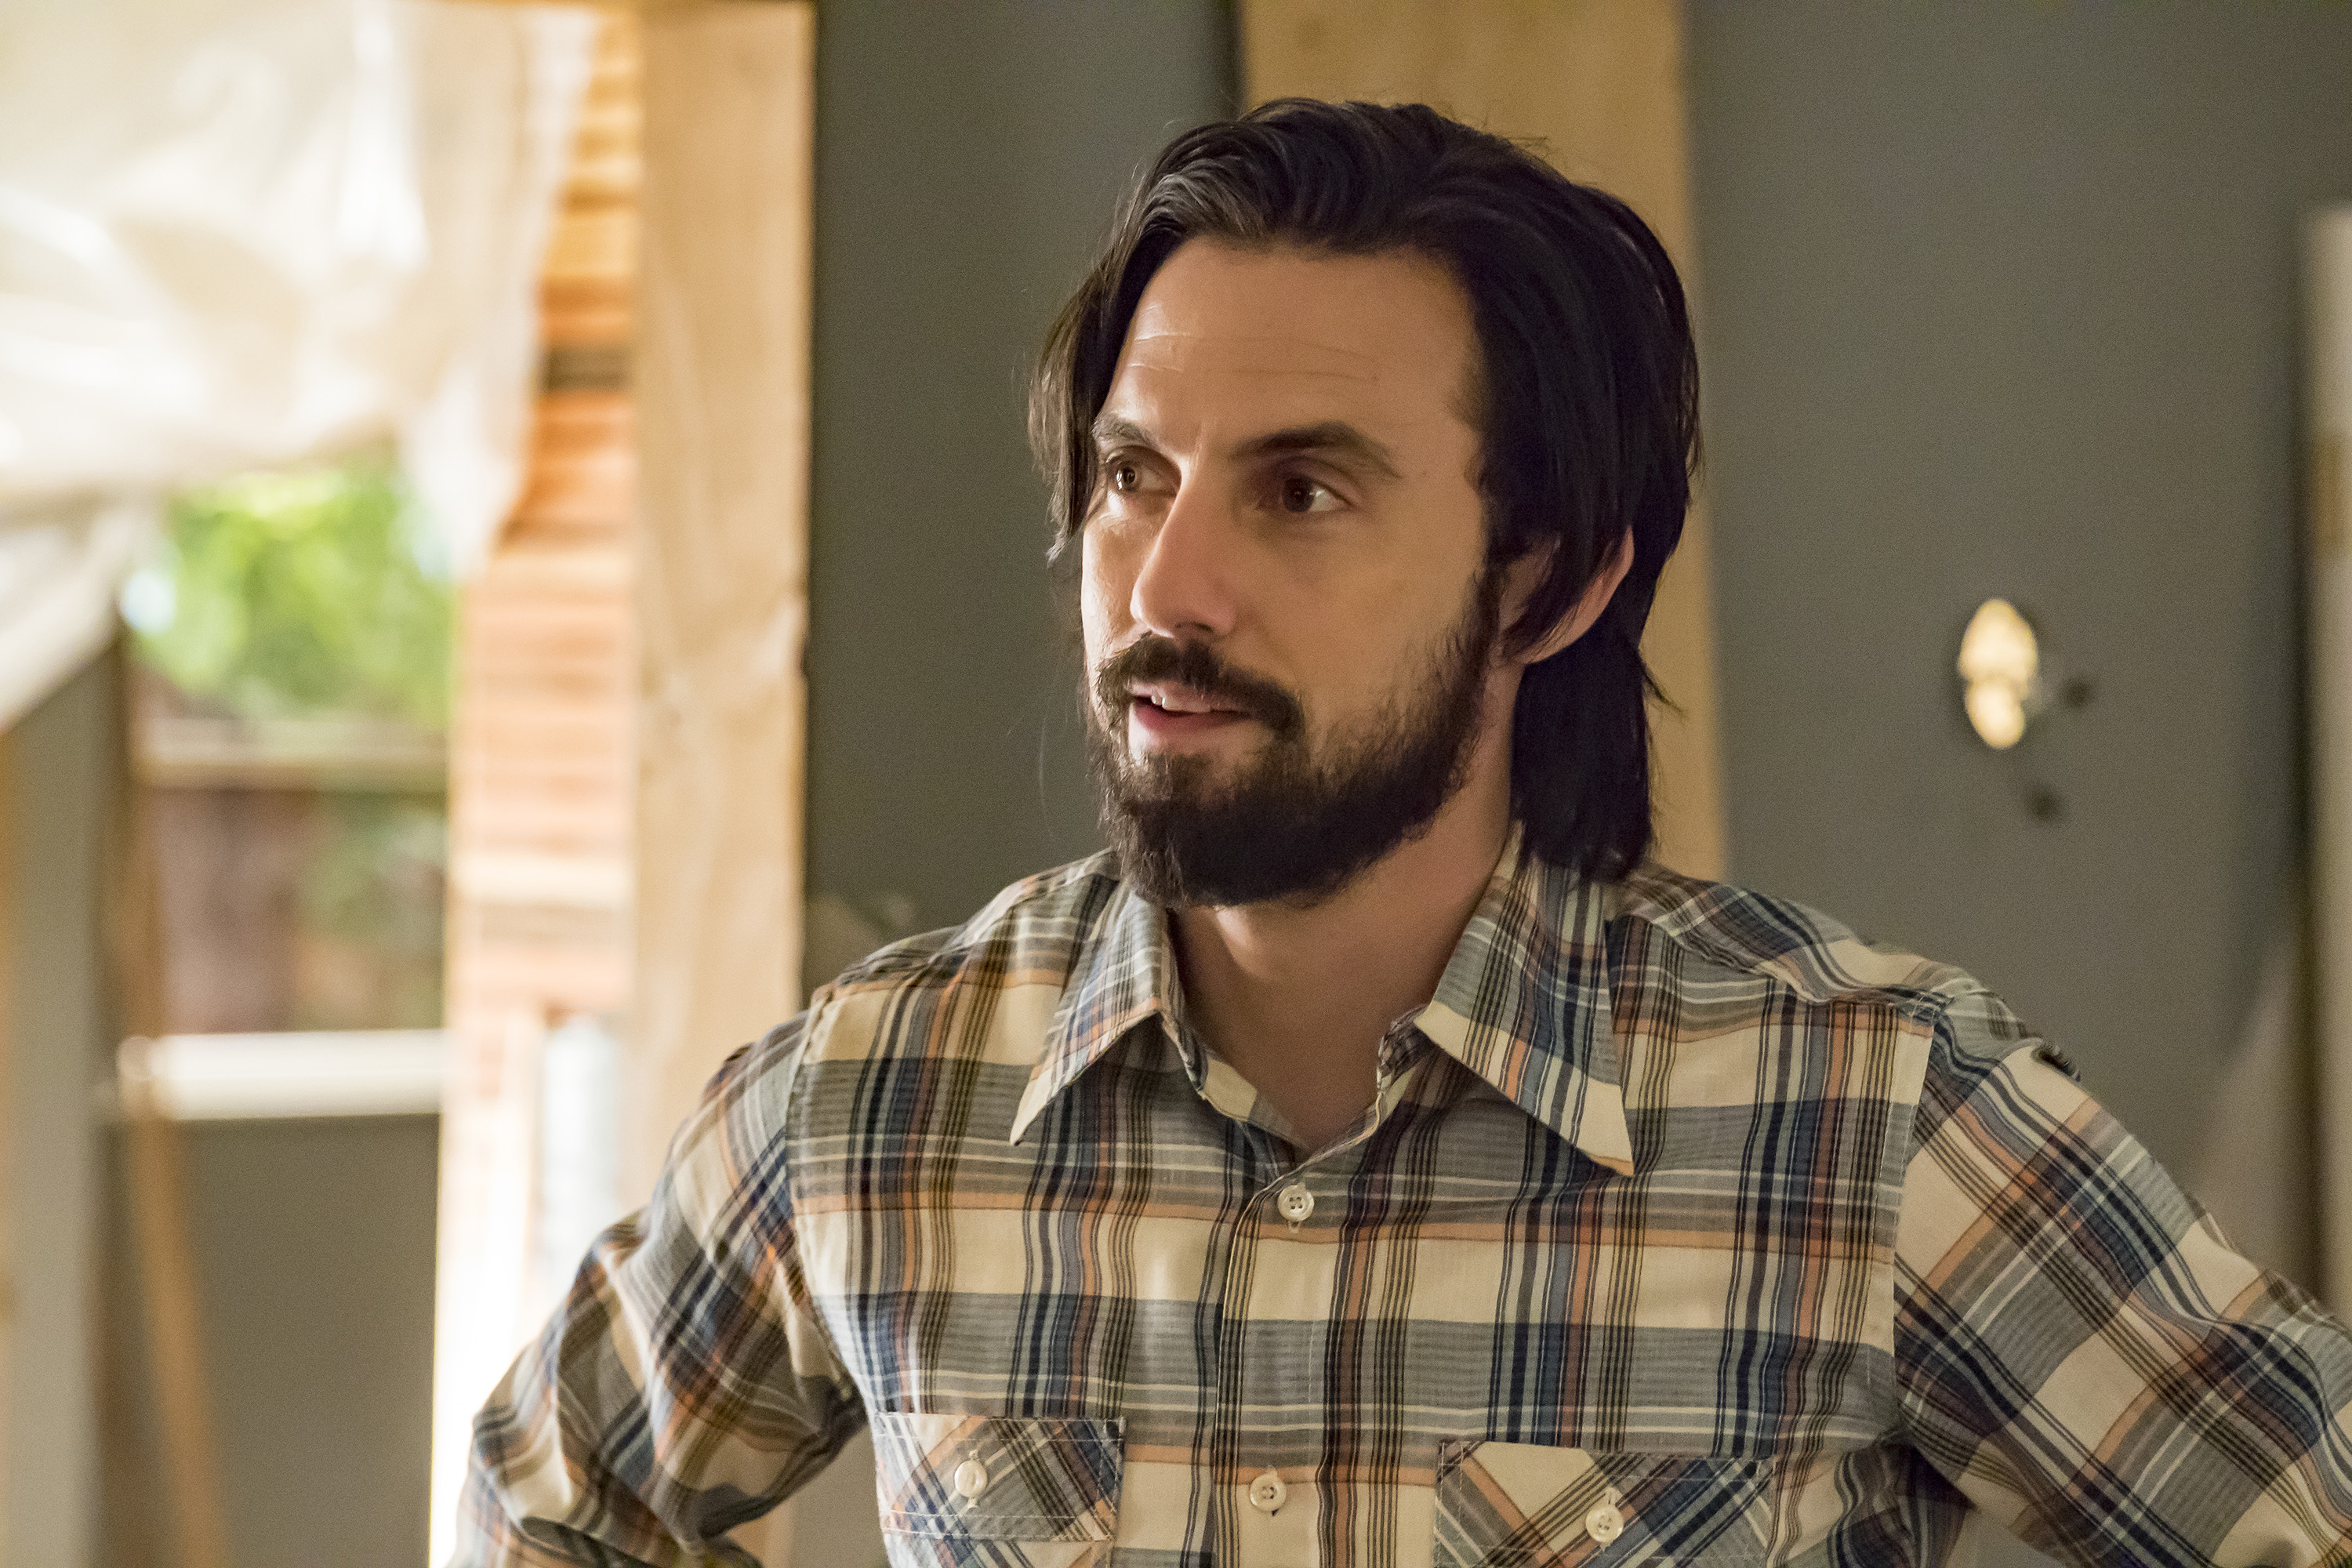 'This Is Us' Season 6 star Milo Ventimiglia, in character as Jack Pearson, wears a blue and white long-sleeved button-up plaid shirt.